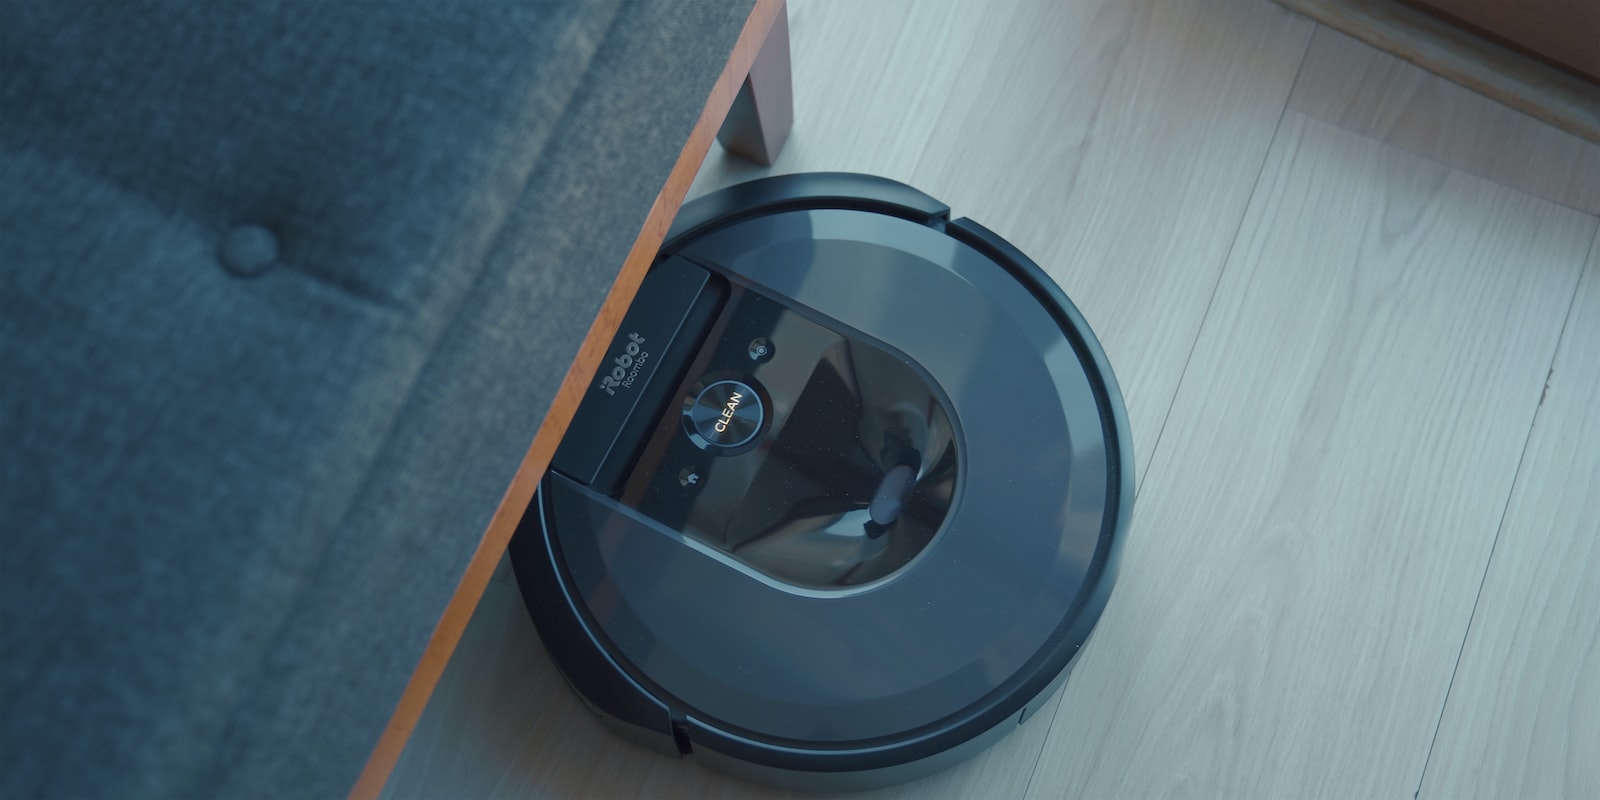 Roomba smart vacuum for a cleaner home